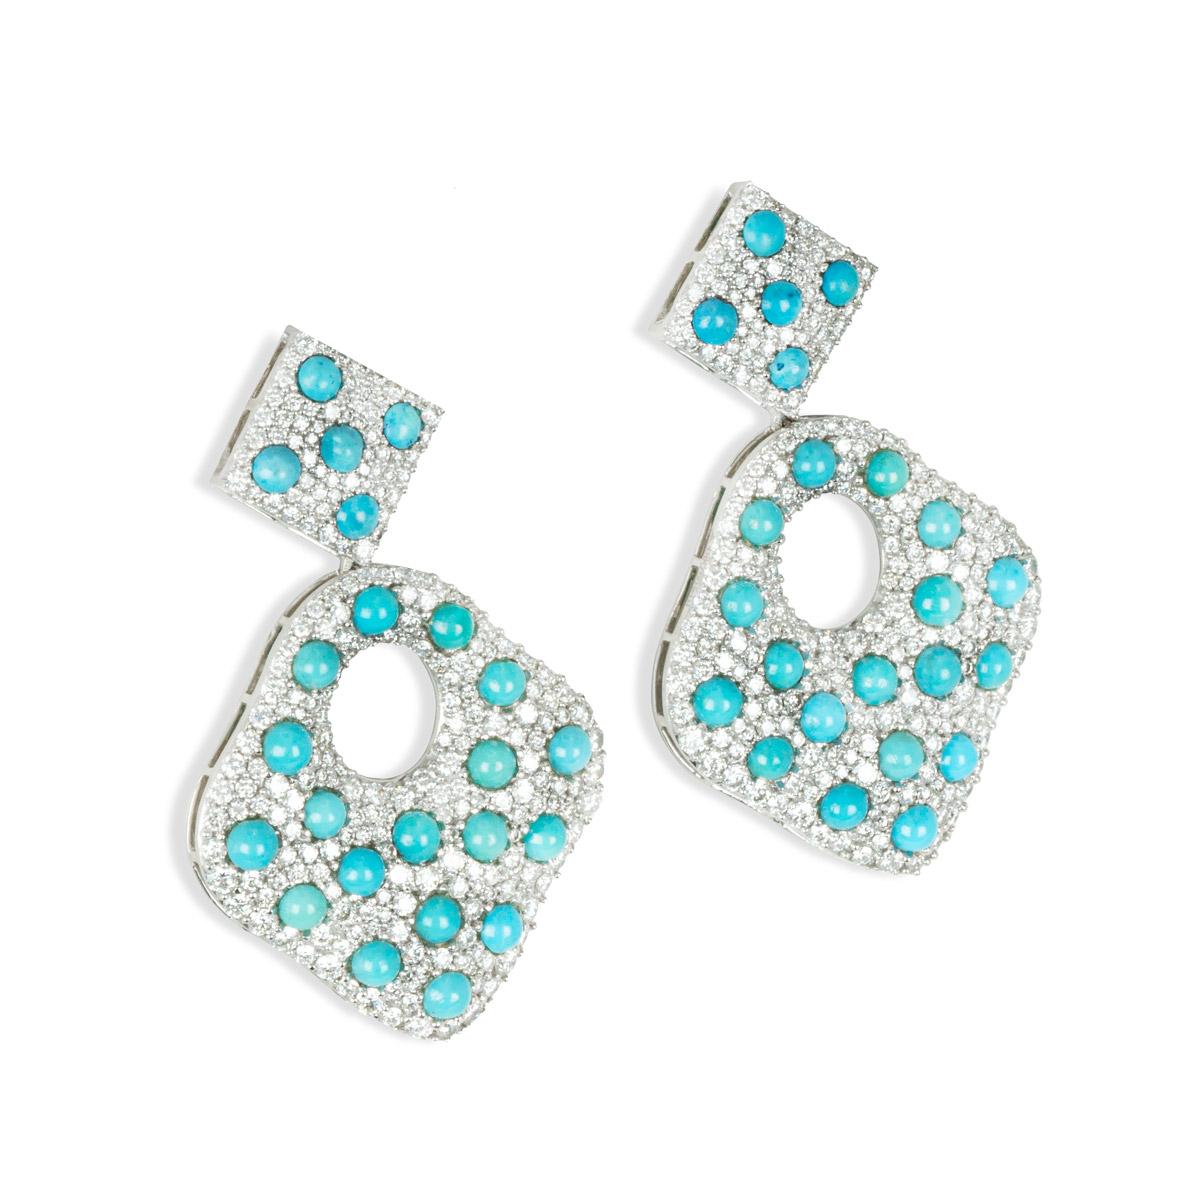 A pair of 18k white gold diamond and turquoise drop earrings. The earrings feature 2 rhombus shapes suspended from one another with an oval opening. There are 485 pave set round brilliant cut diamonds totalling 6.02ct, G-H colour and VS clarity and